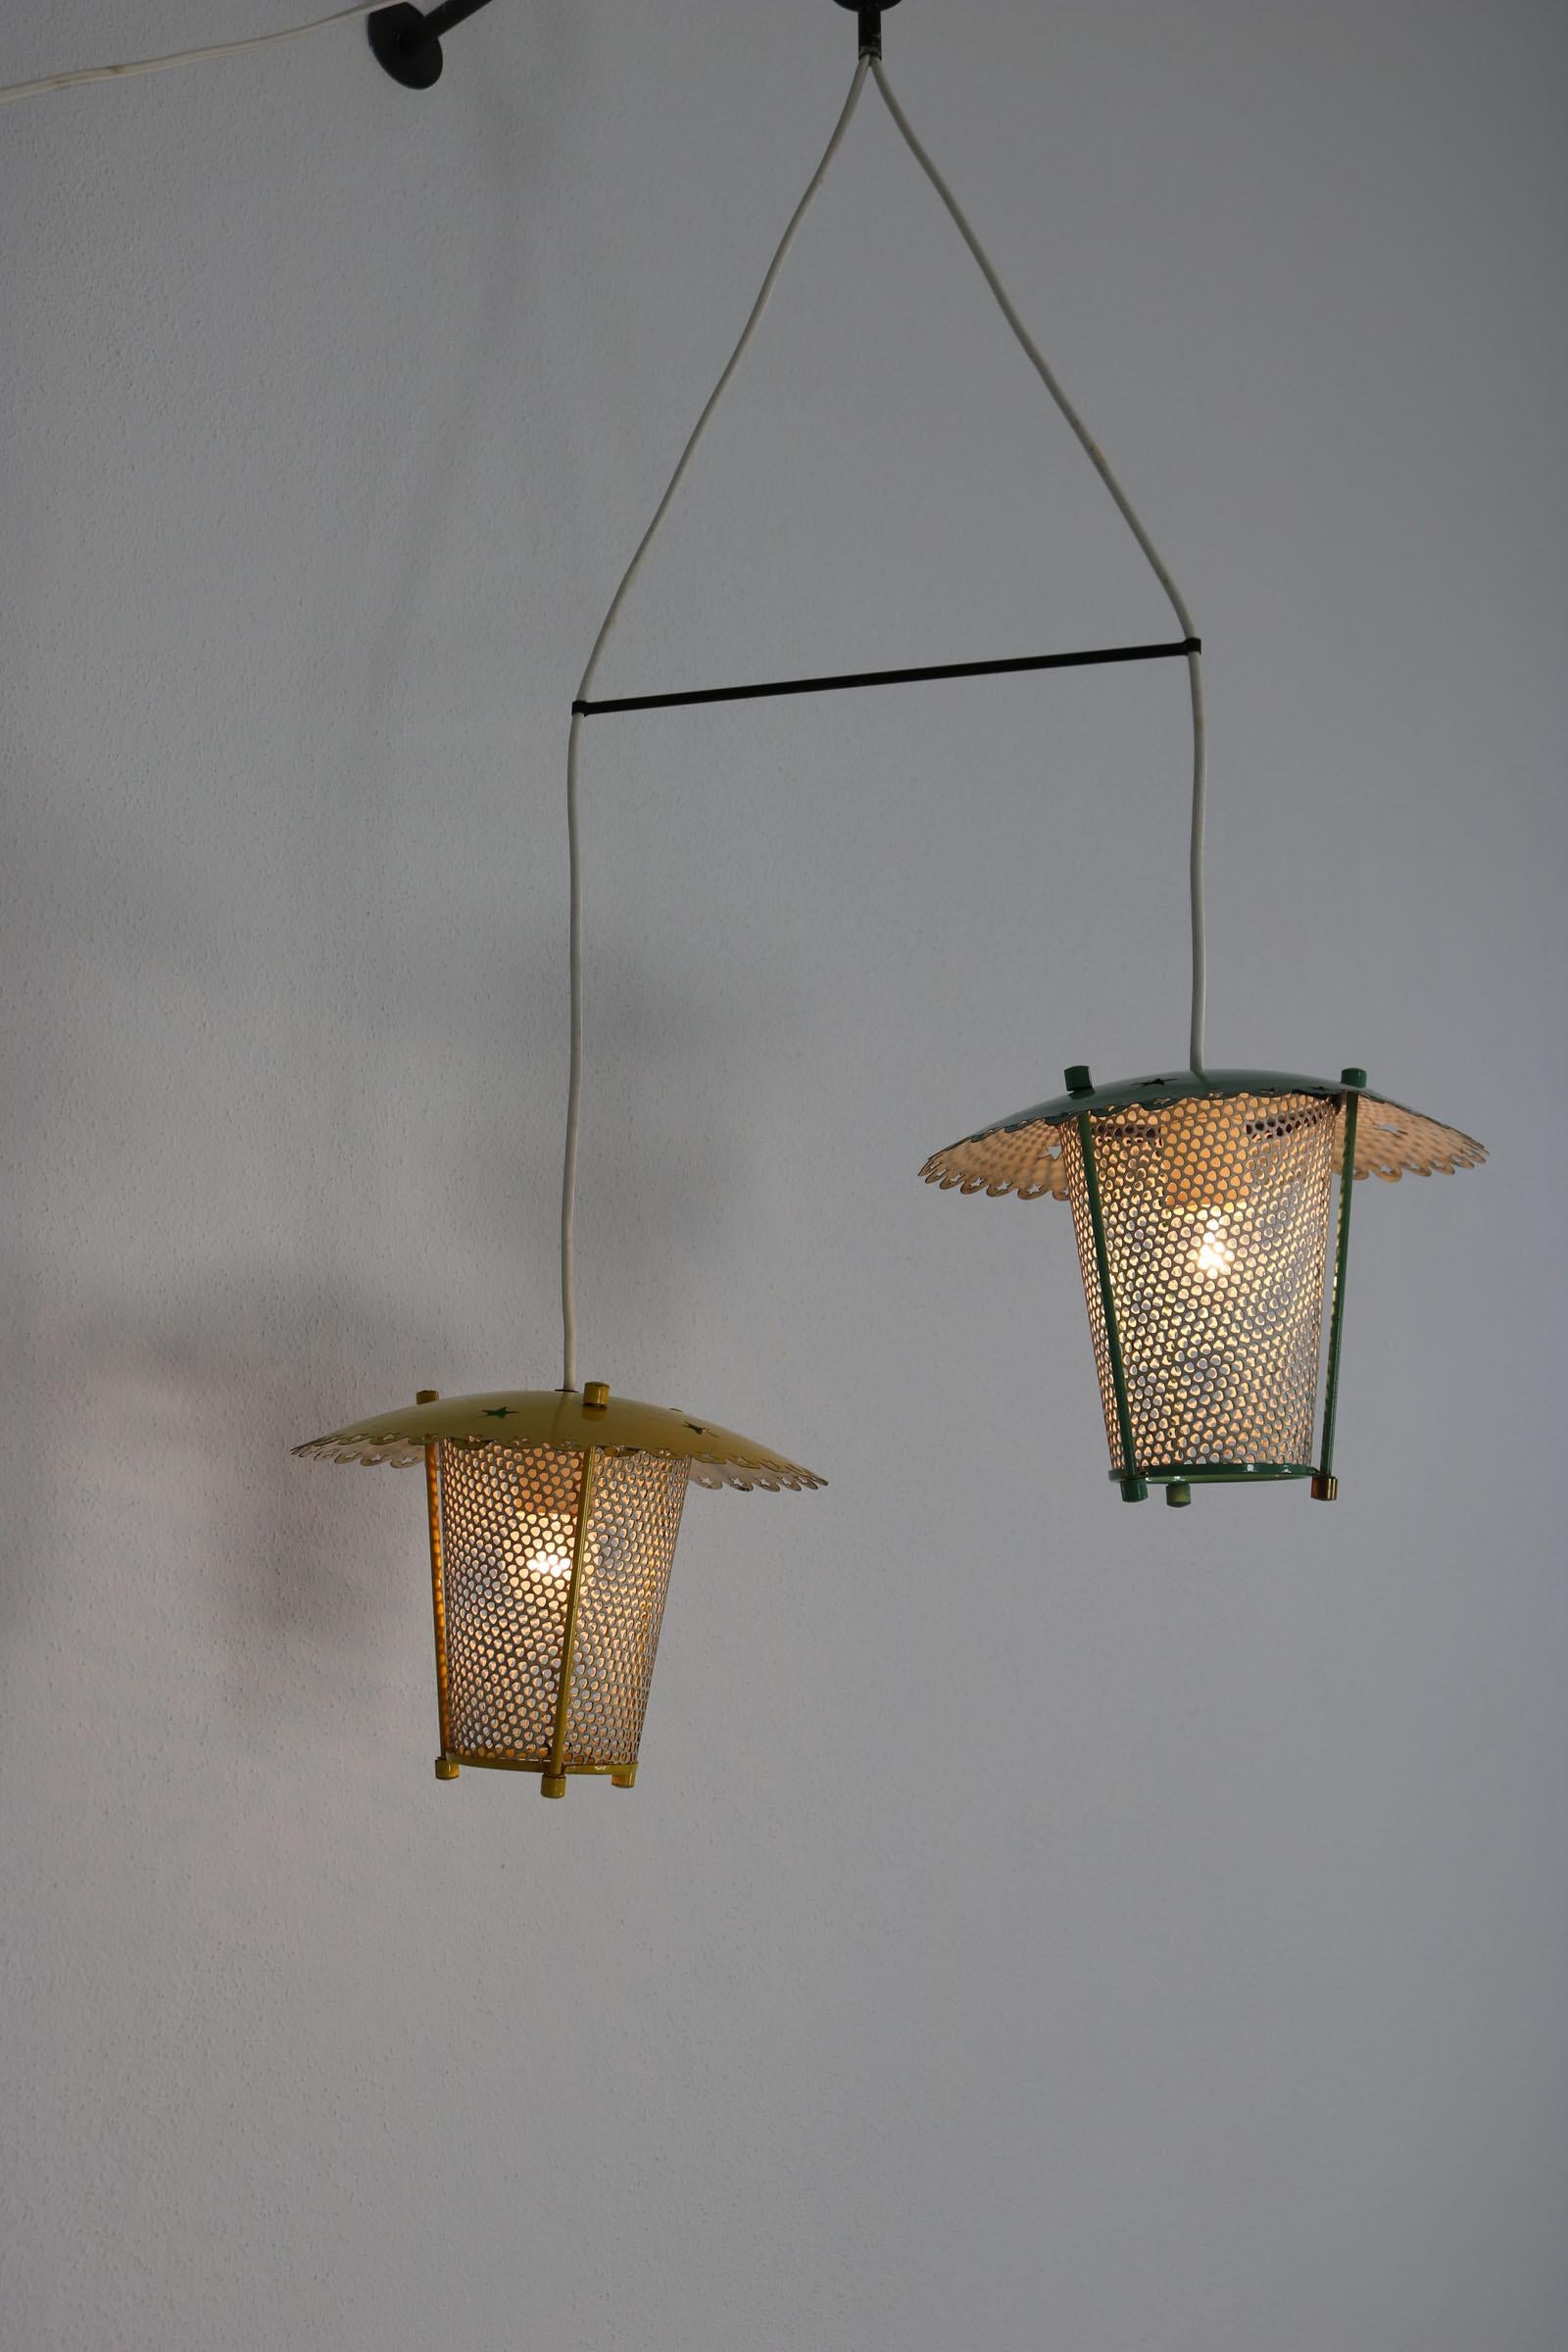 Pendant lamp consisting of two lanterns. The two aluminium lanterns with punched out stars are lacquered in yellow and turquoise. Due to the perforated metal shade, the light casts a beautiful shadow pattern. The Italian lamp from the 50s has been